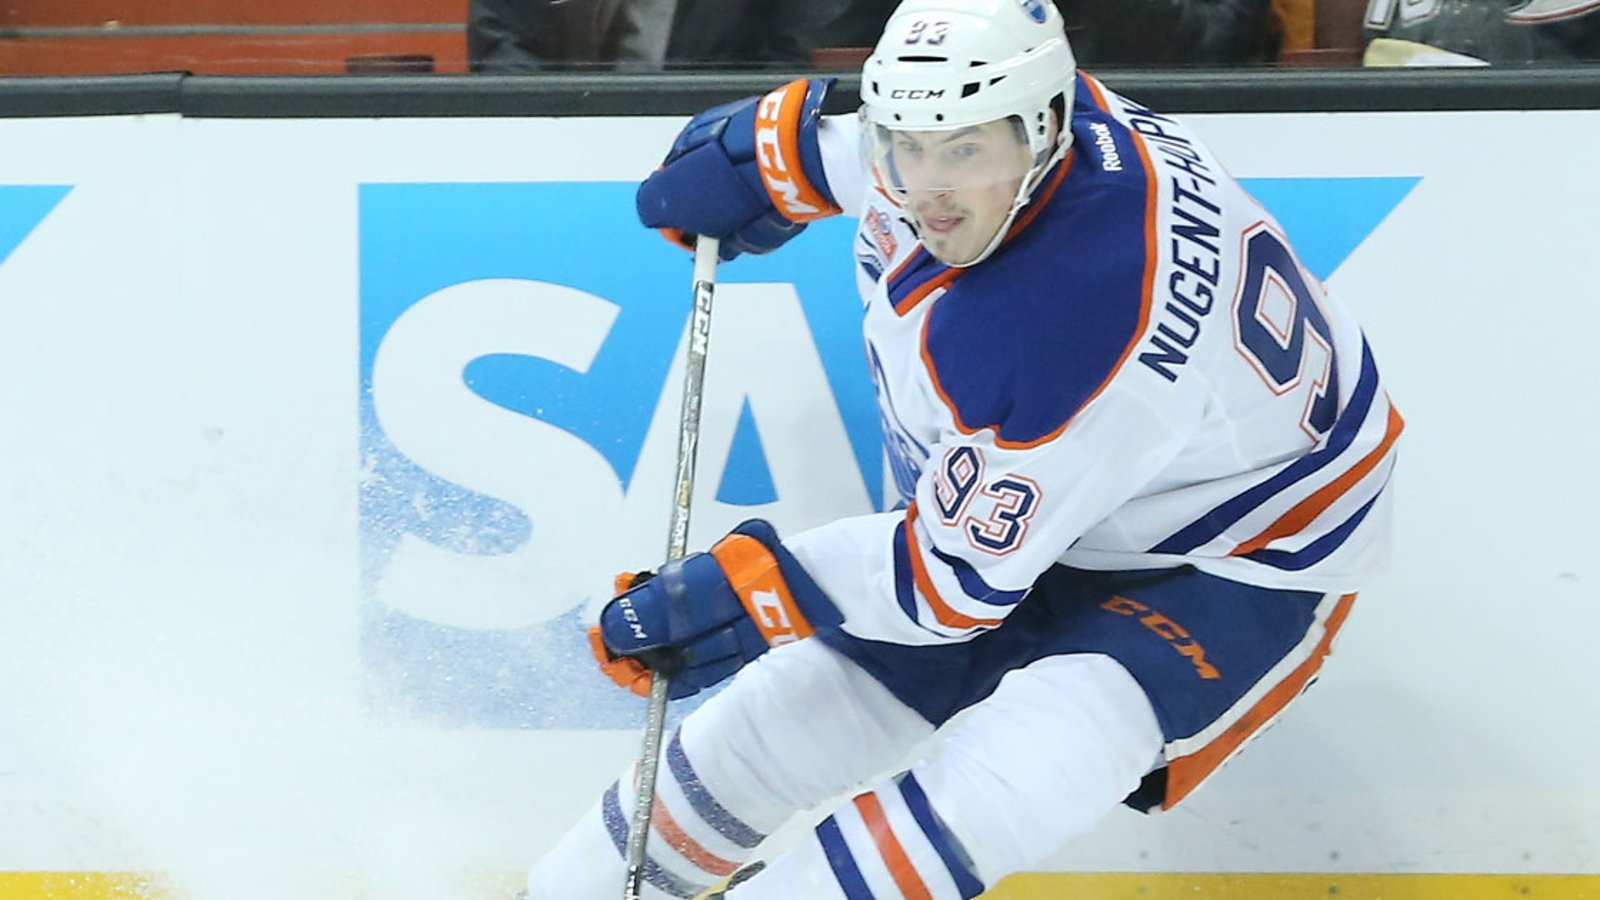 Breaking: Crucial update on a possible Ryan Nugent-Hopkins trade